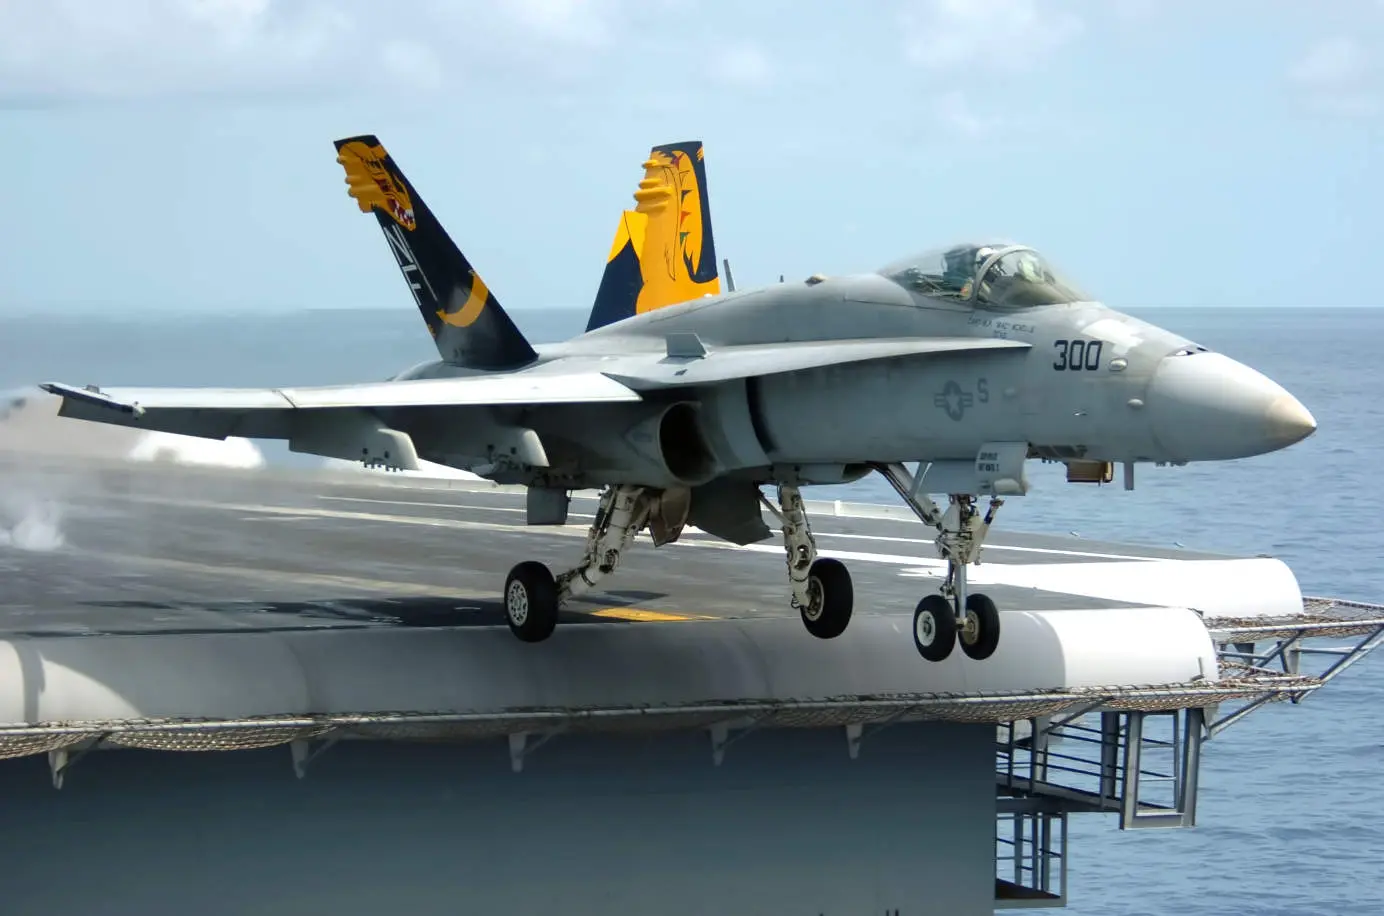 F-18 Hornet launching from carrier